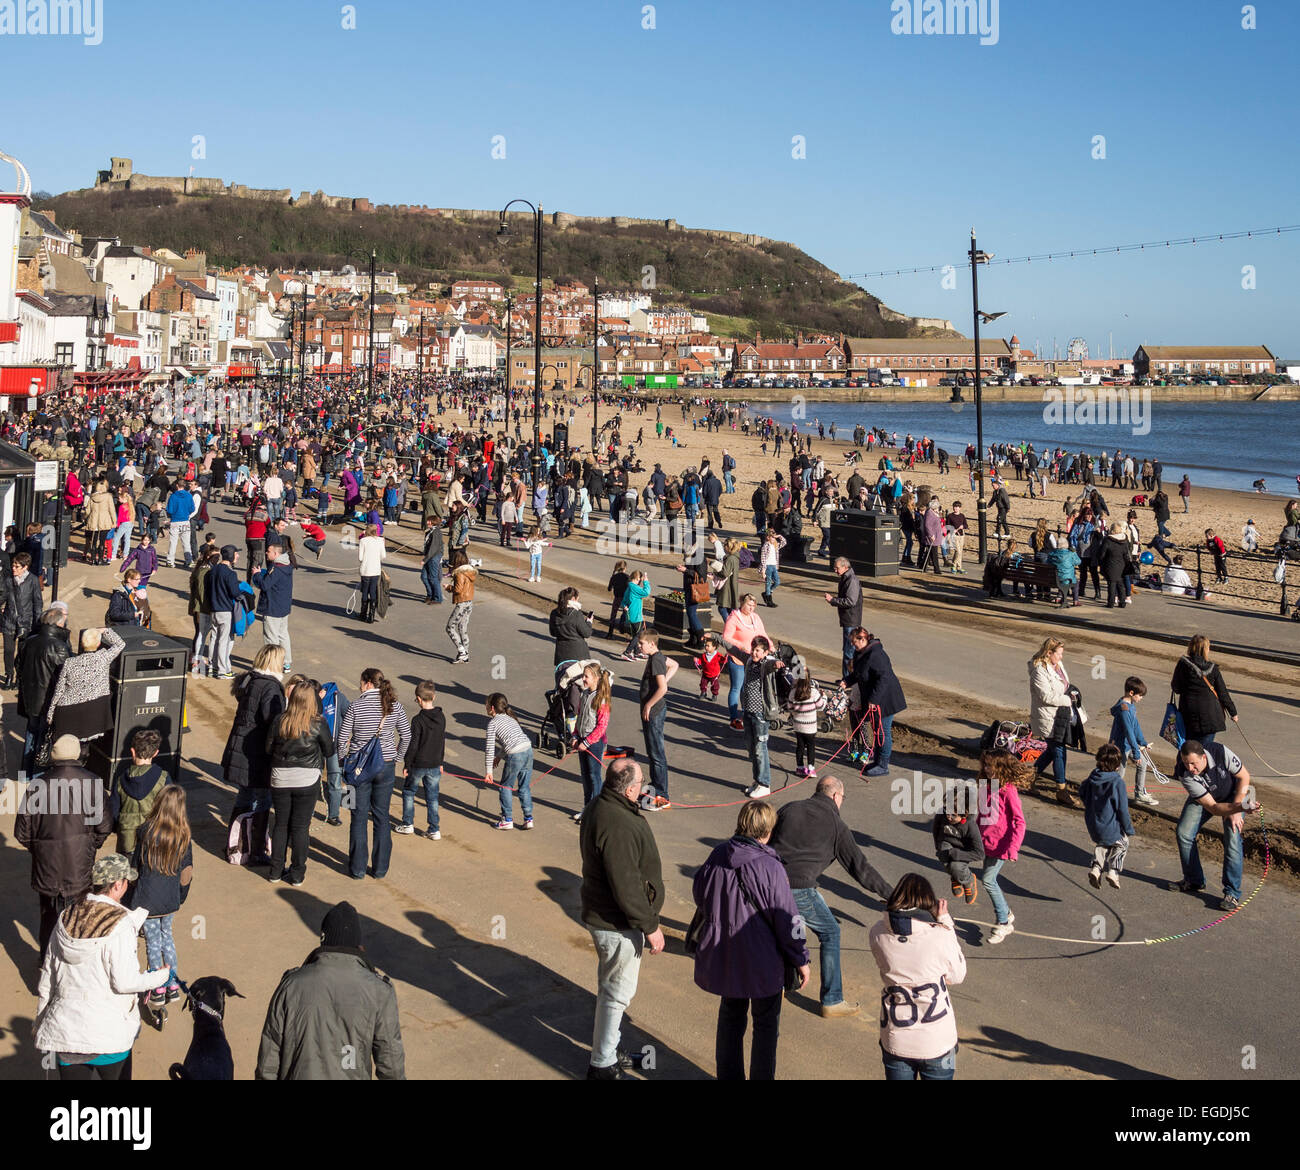 Traditional Shrove Tuesday skipping custom on the foreshore Scarborough Yorkshire UK Stock Photo